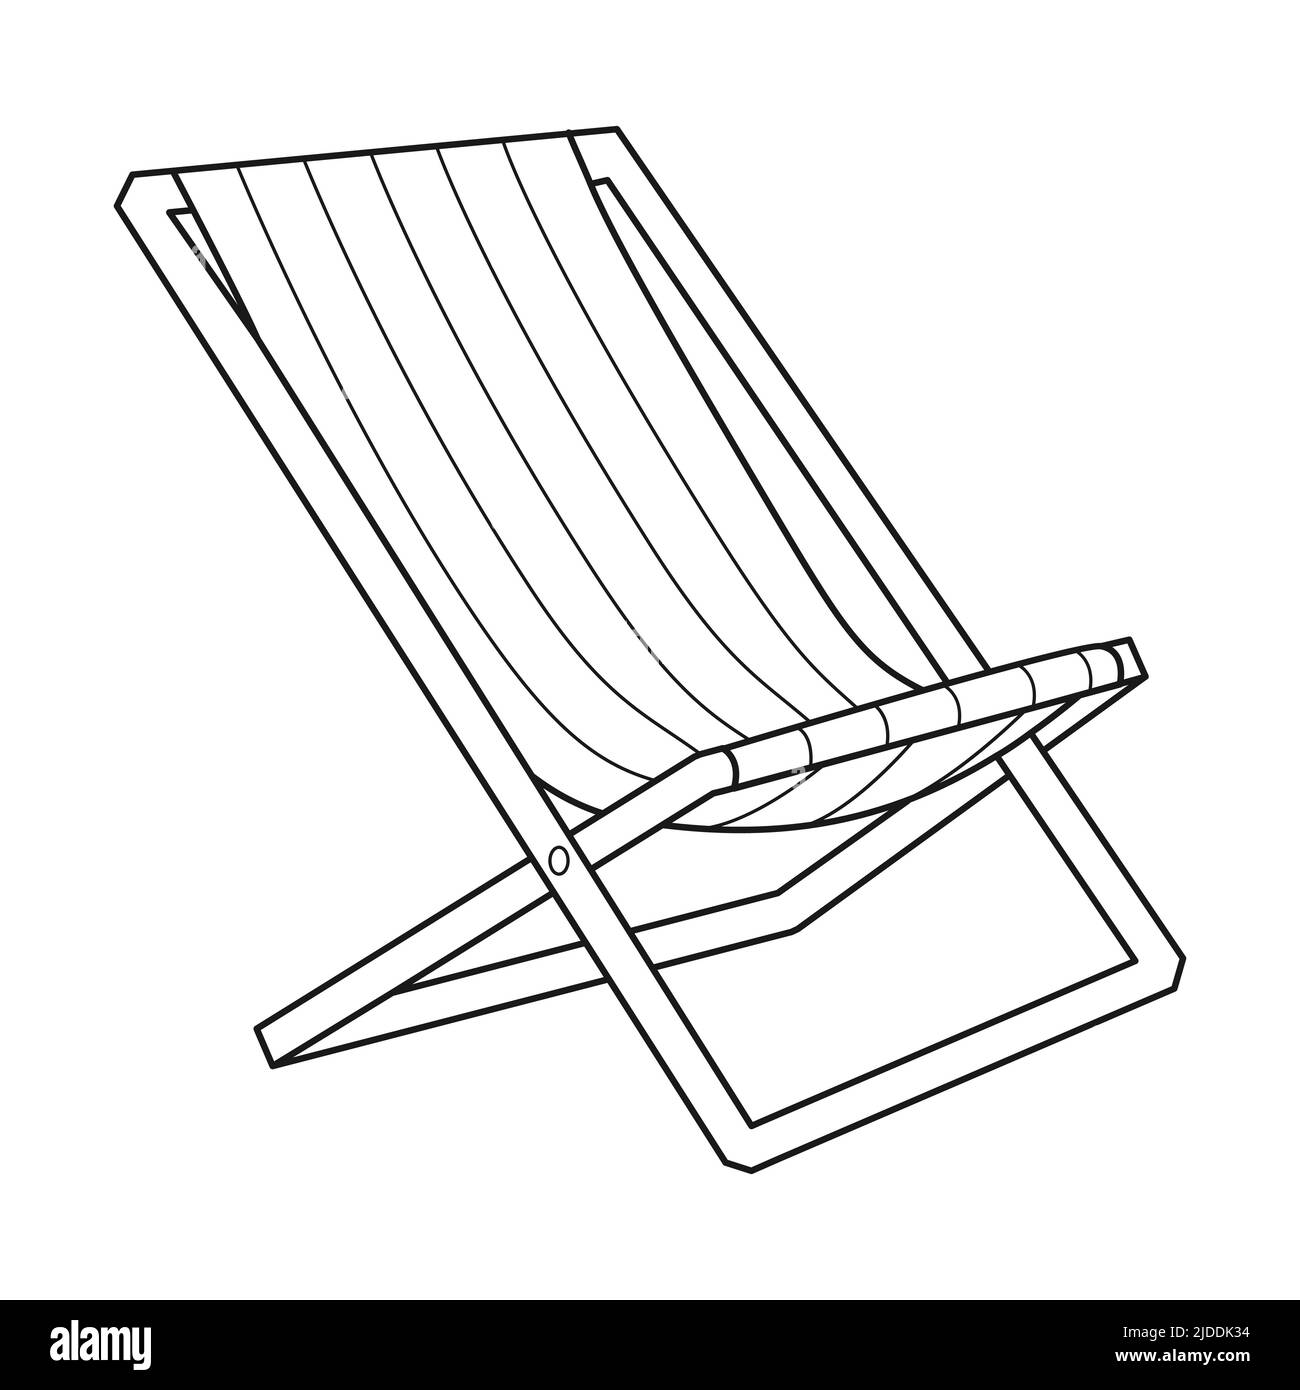 Doodle Tourist or beach folding chair. Equipment for camping, car travel, garden, beach. A piece of outdoor furniture. Outline black and white vector Stock Vector